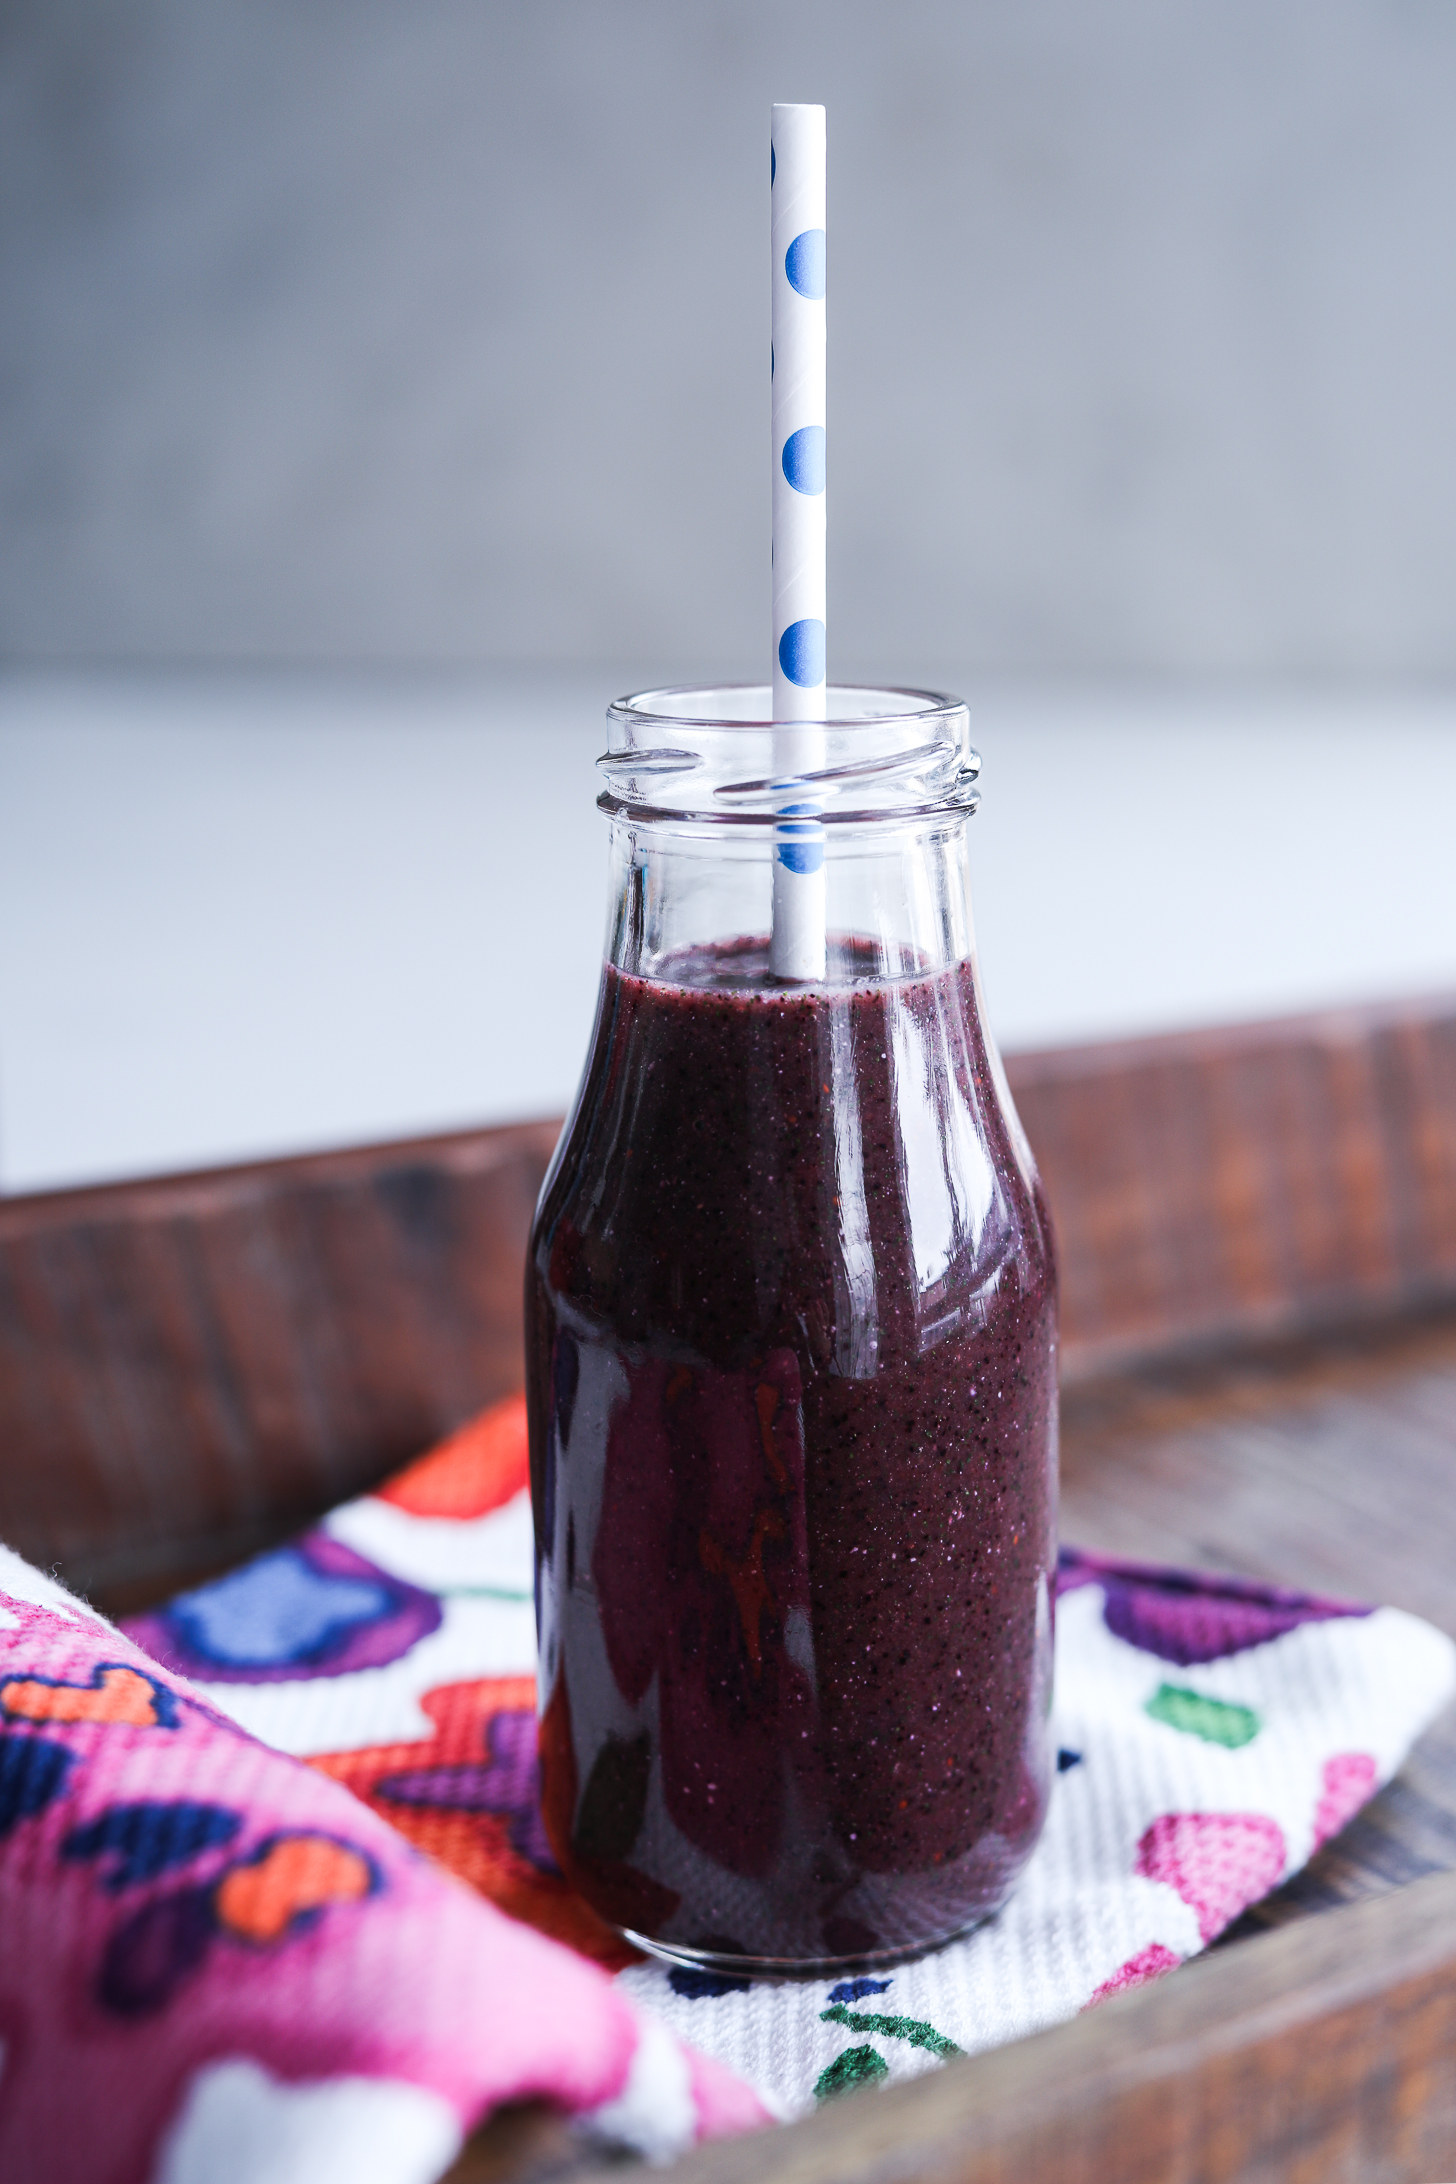 Close-up photo of a blueberry kale smoothie in a bottle with a straw, situated on a tray atop a cloth.